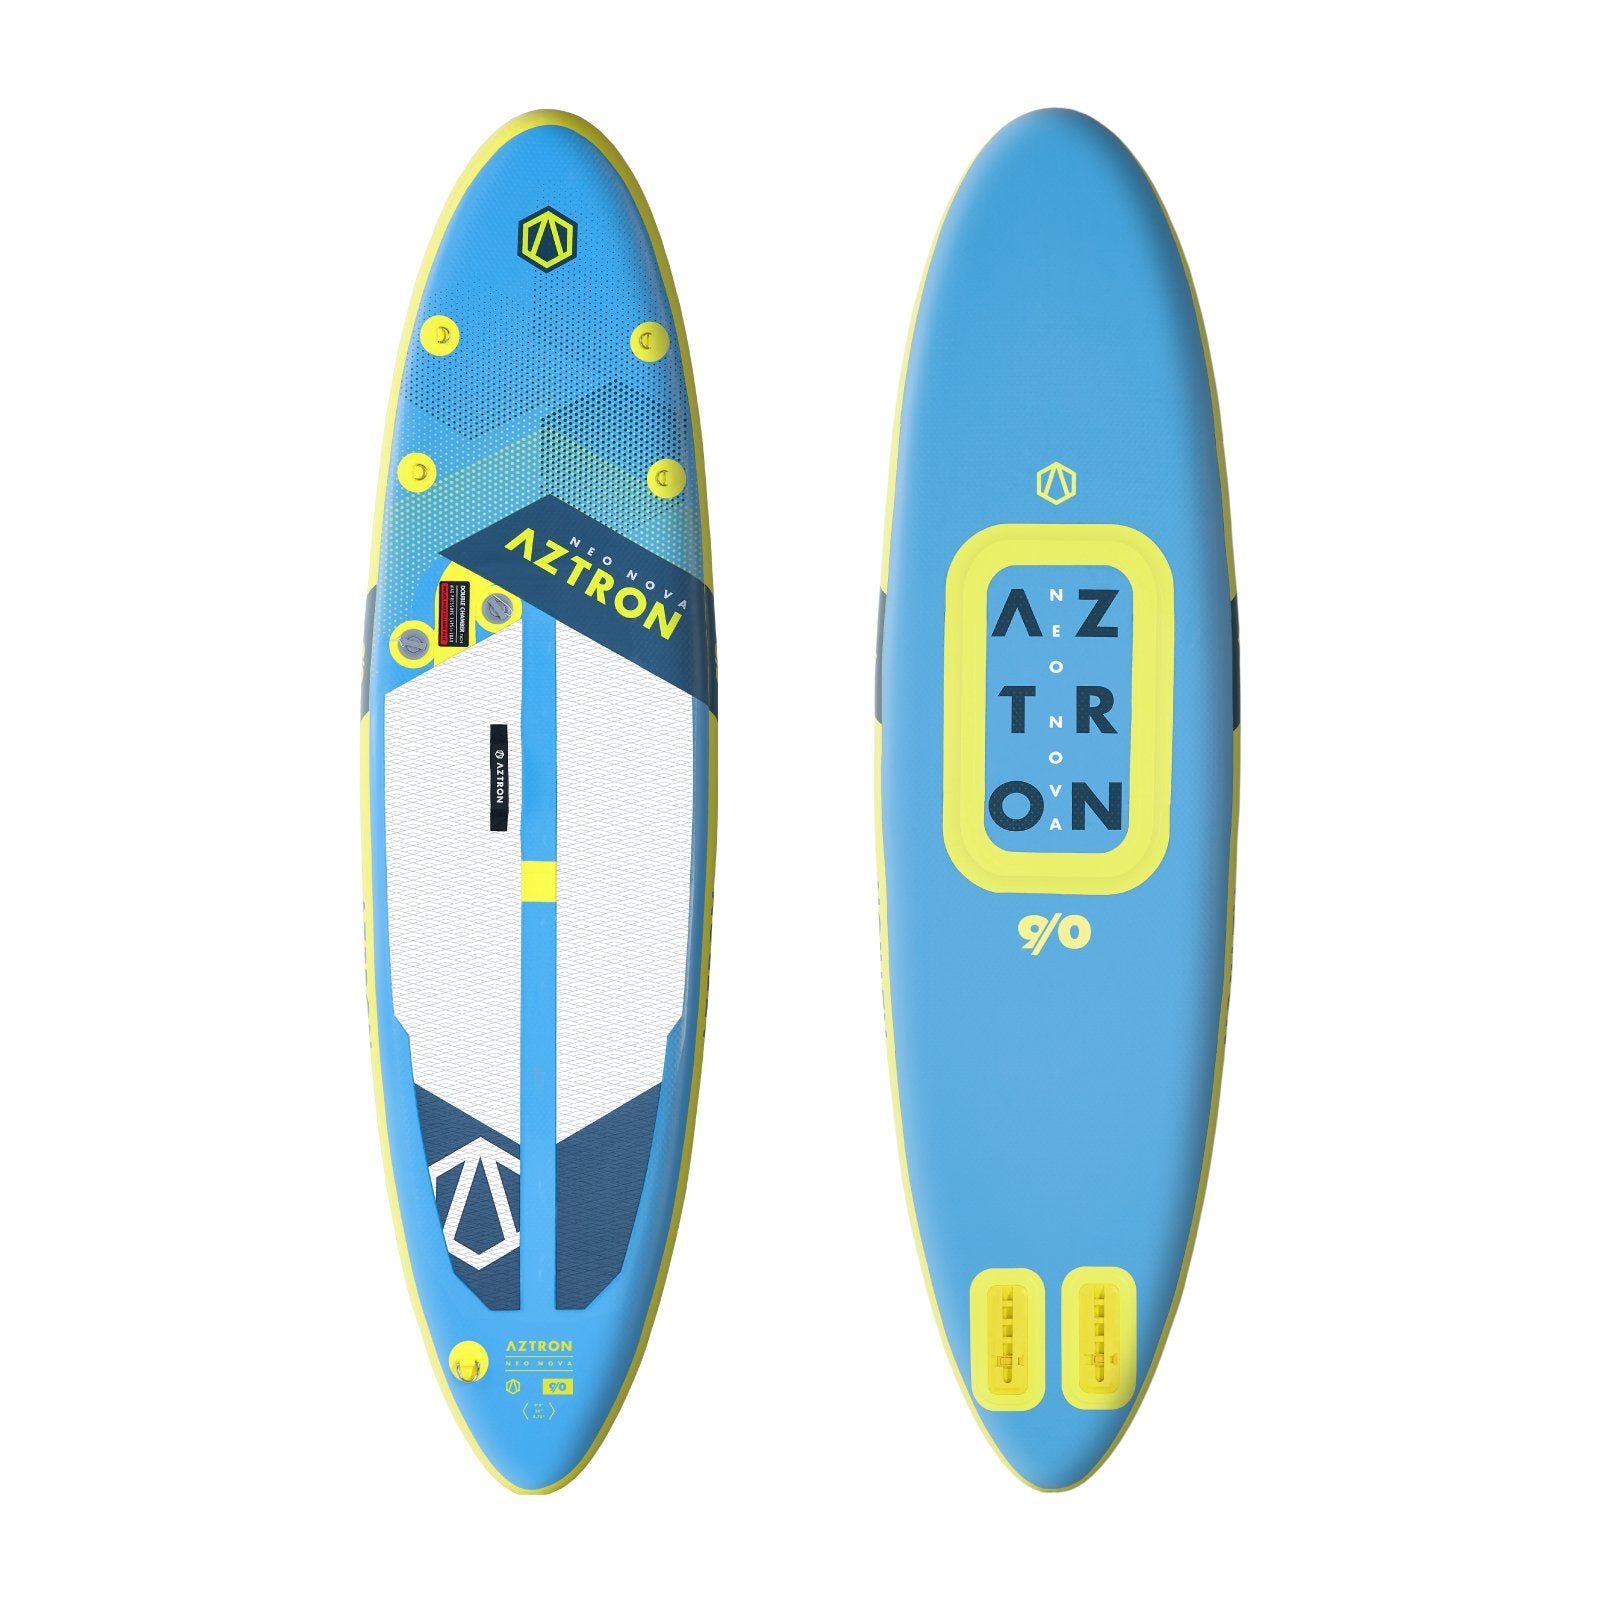 Aztron 9' NEO NOVA COMPACT Paddleboard Package - Worthing Watersports - AS-009 - Aztron